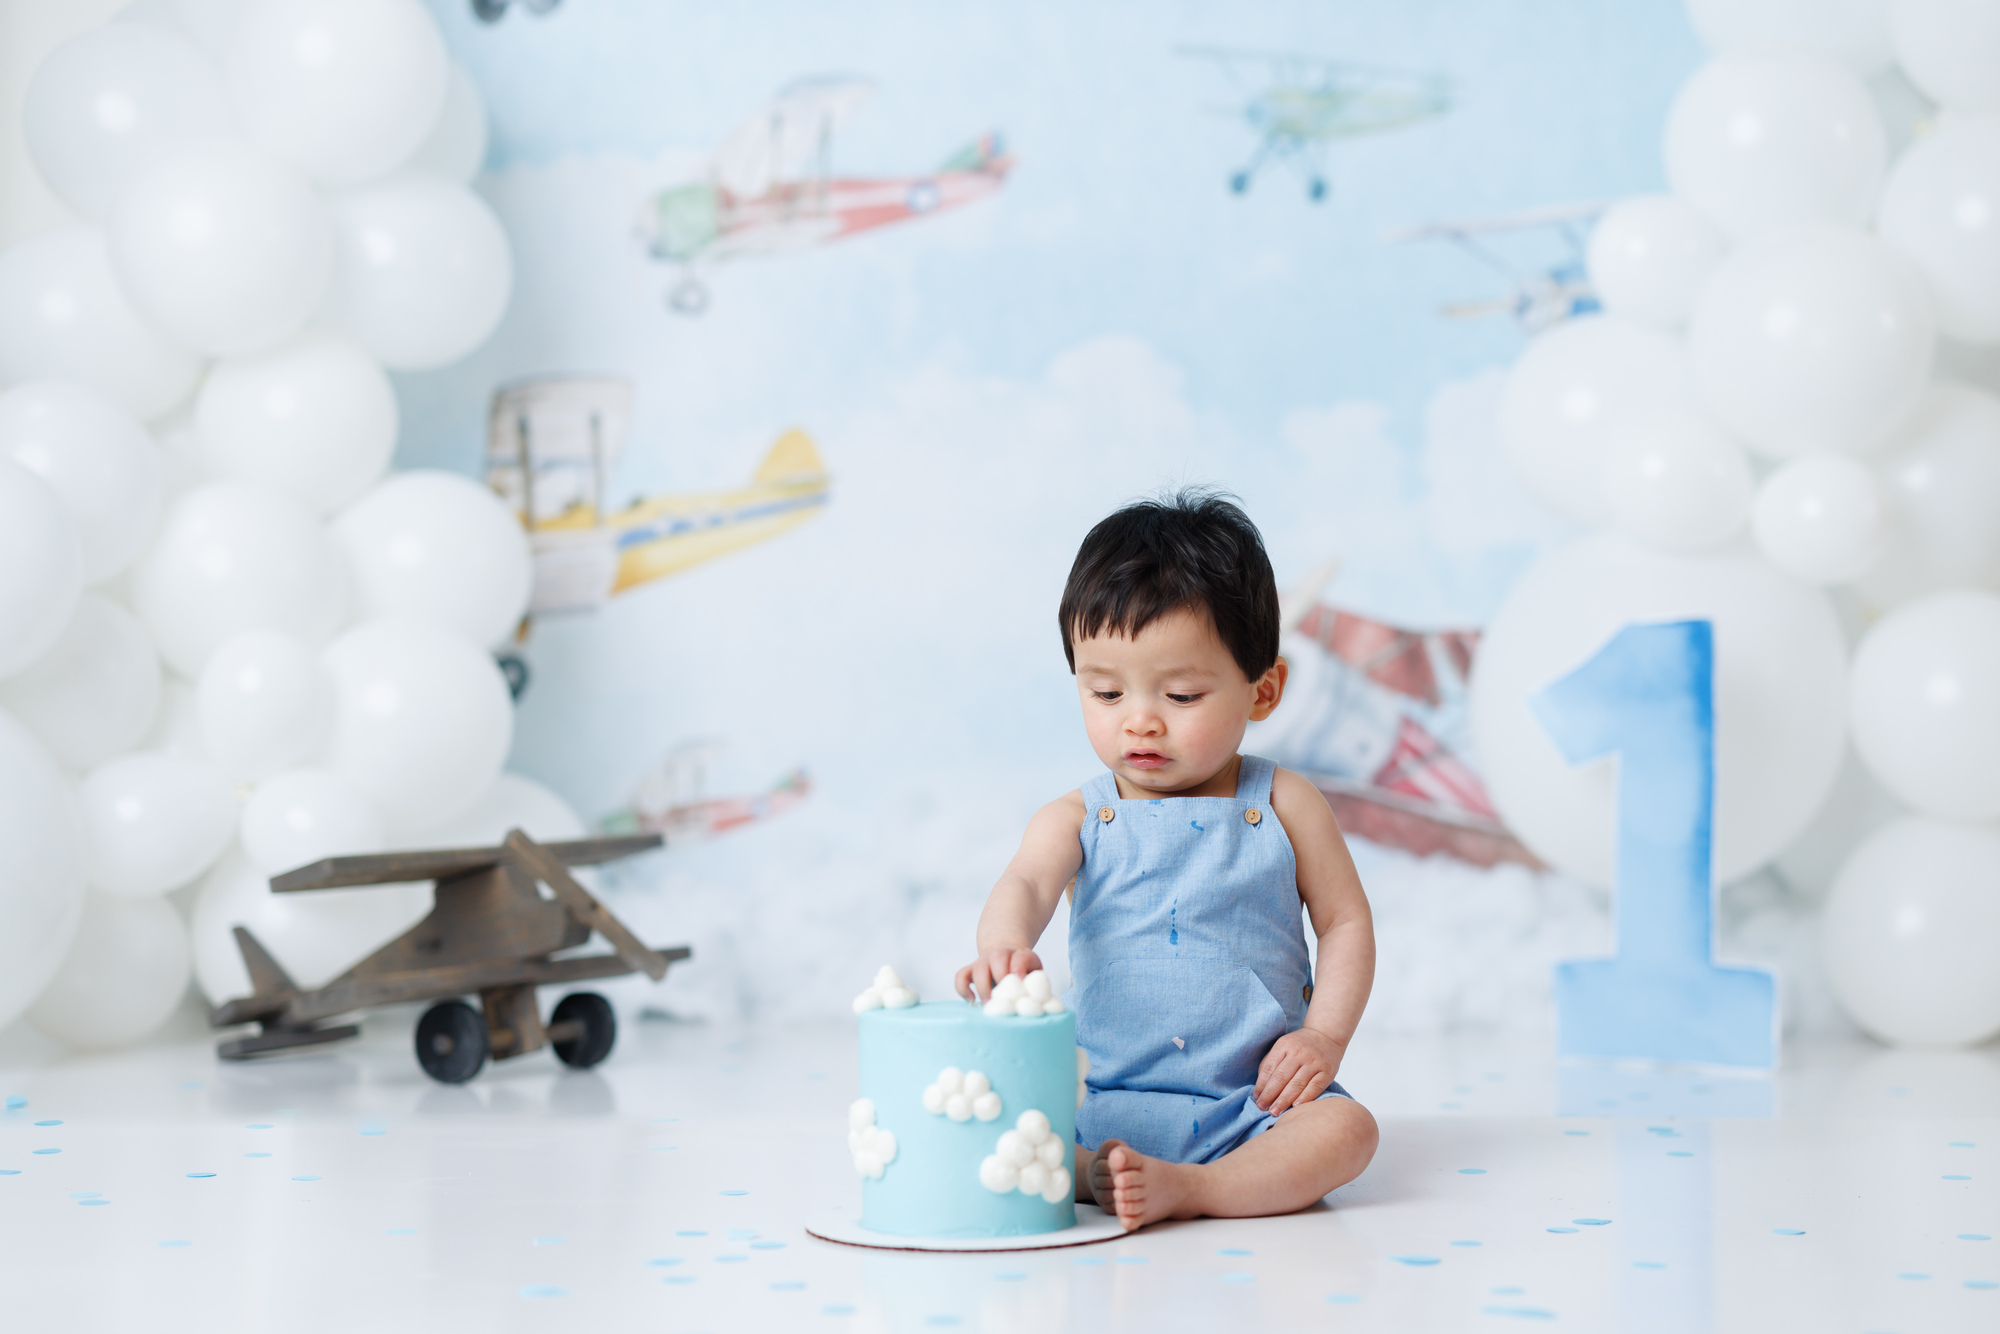 boy eating cake with clouds on it